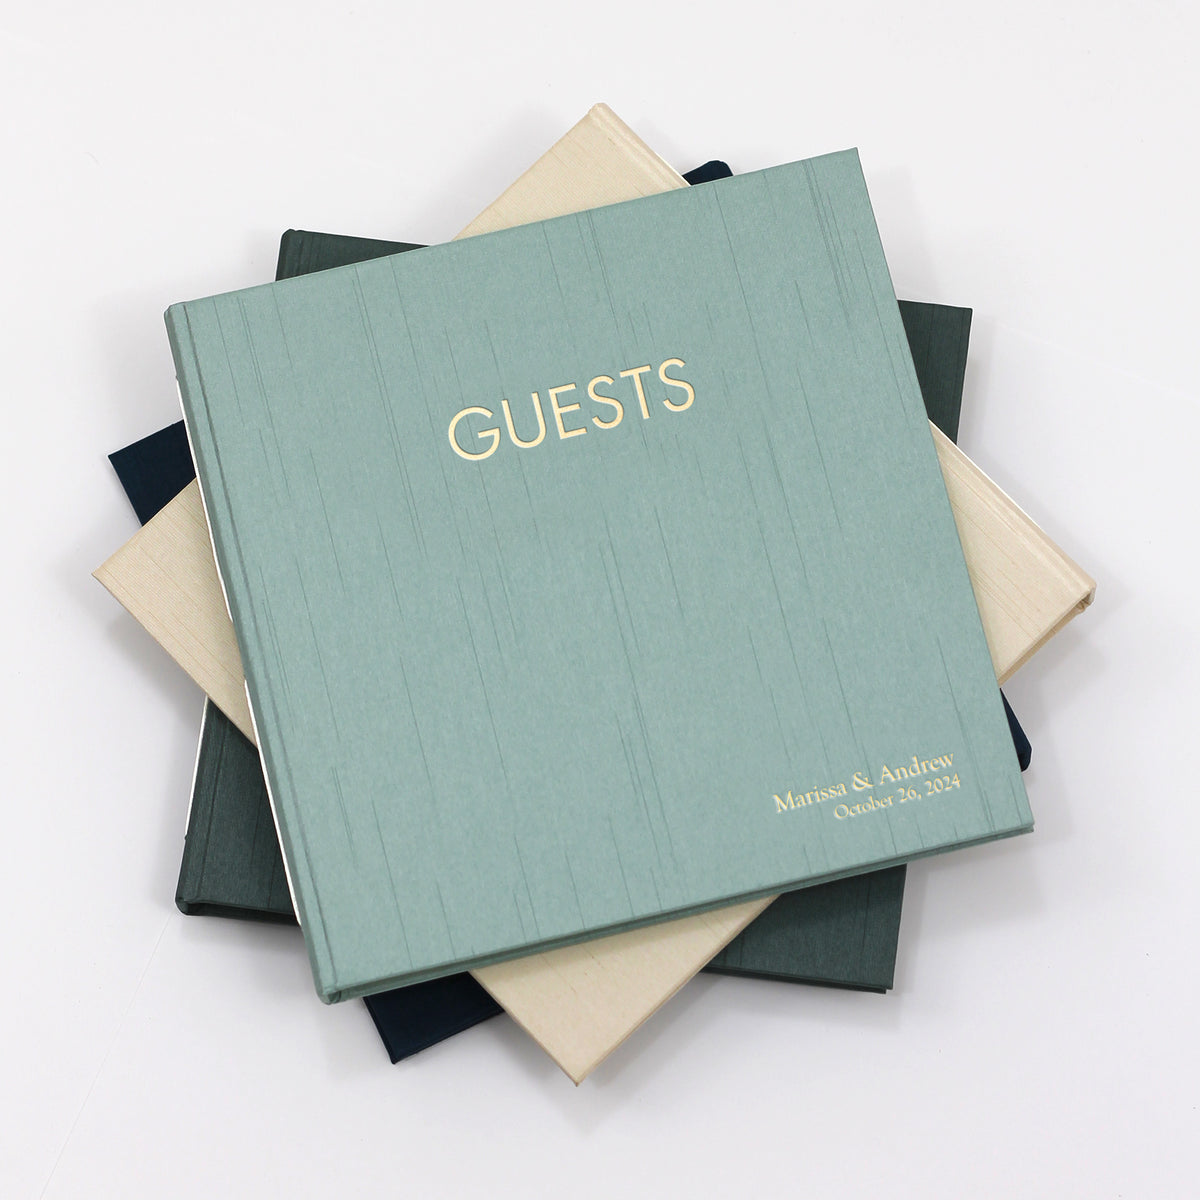 Event Guestbook Embossed with “Guests” | Cover: Teal Blue Silk | Available Personalized